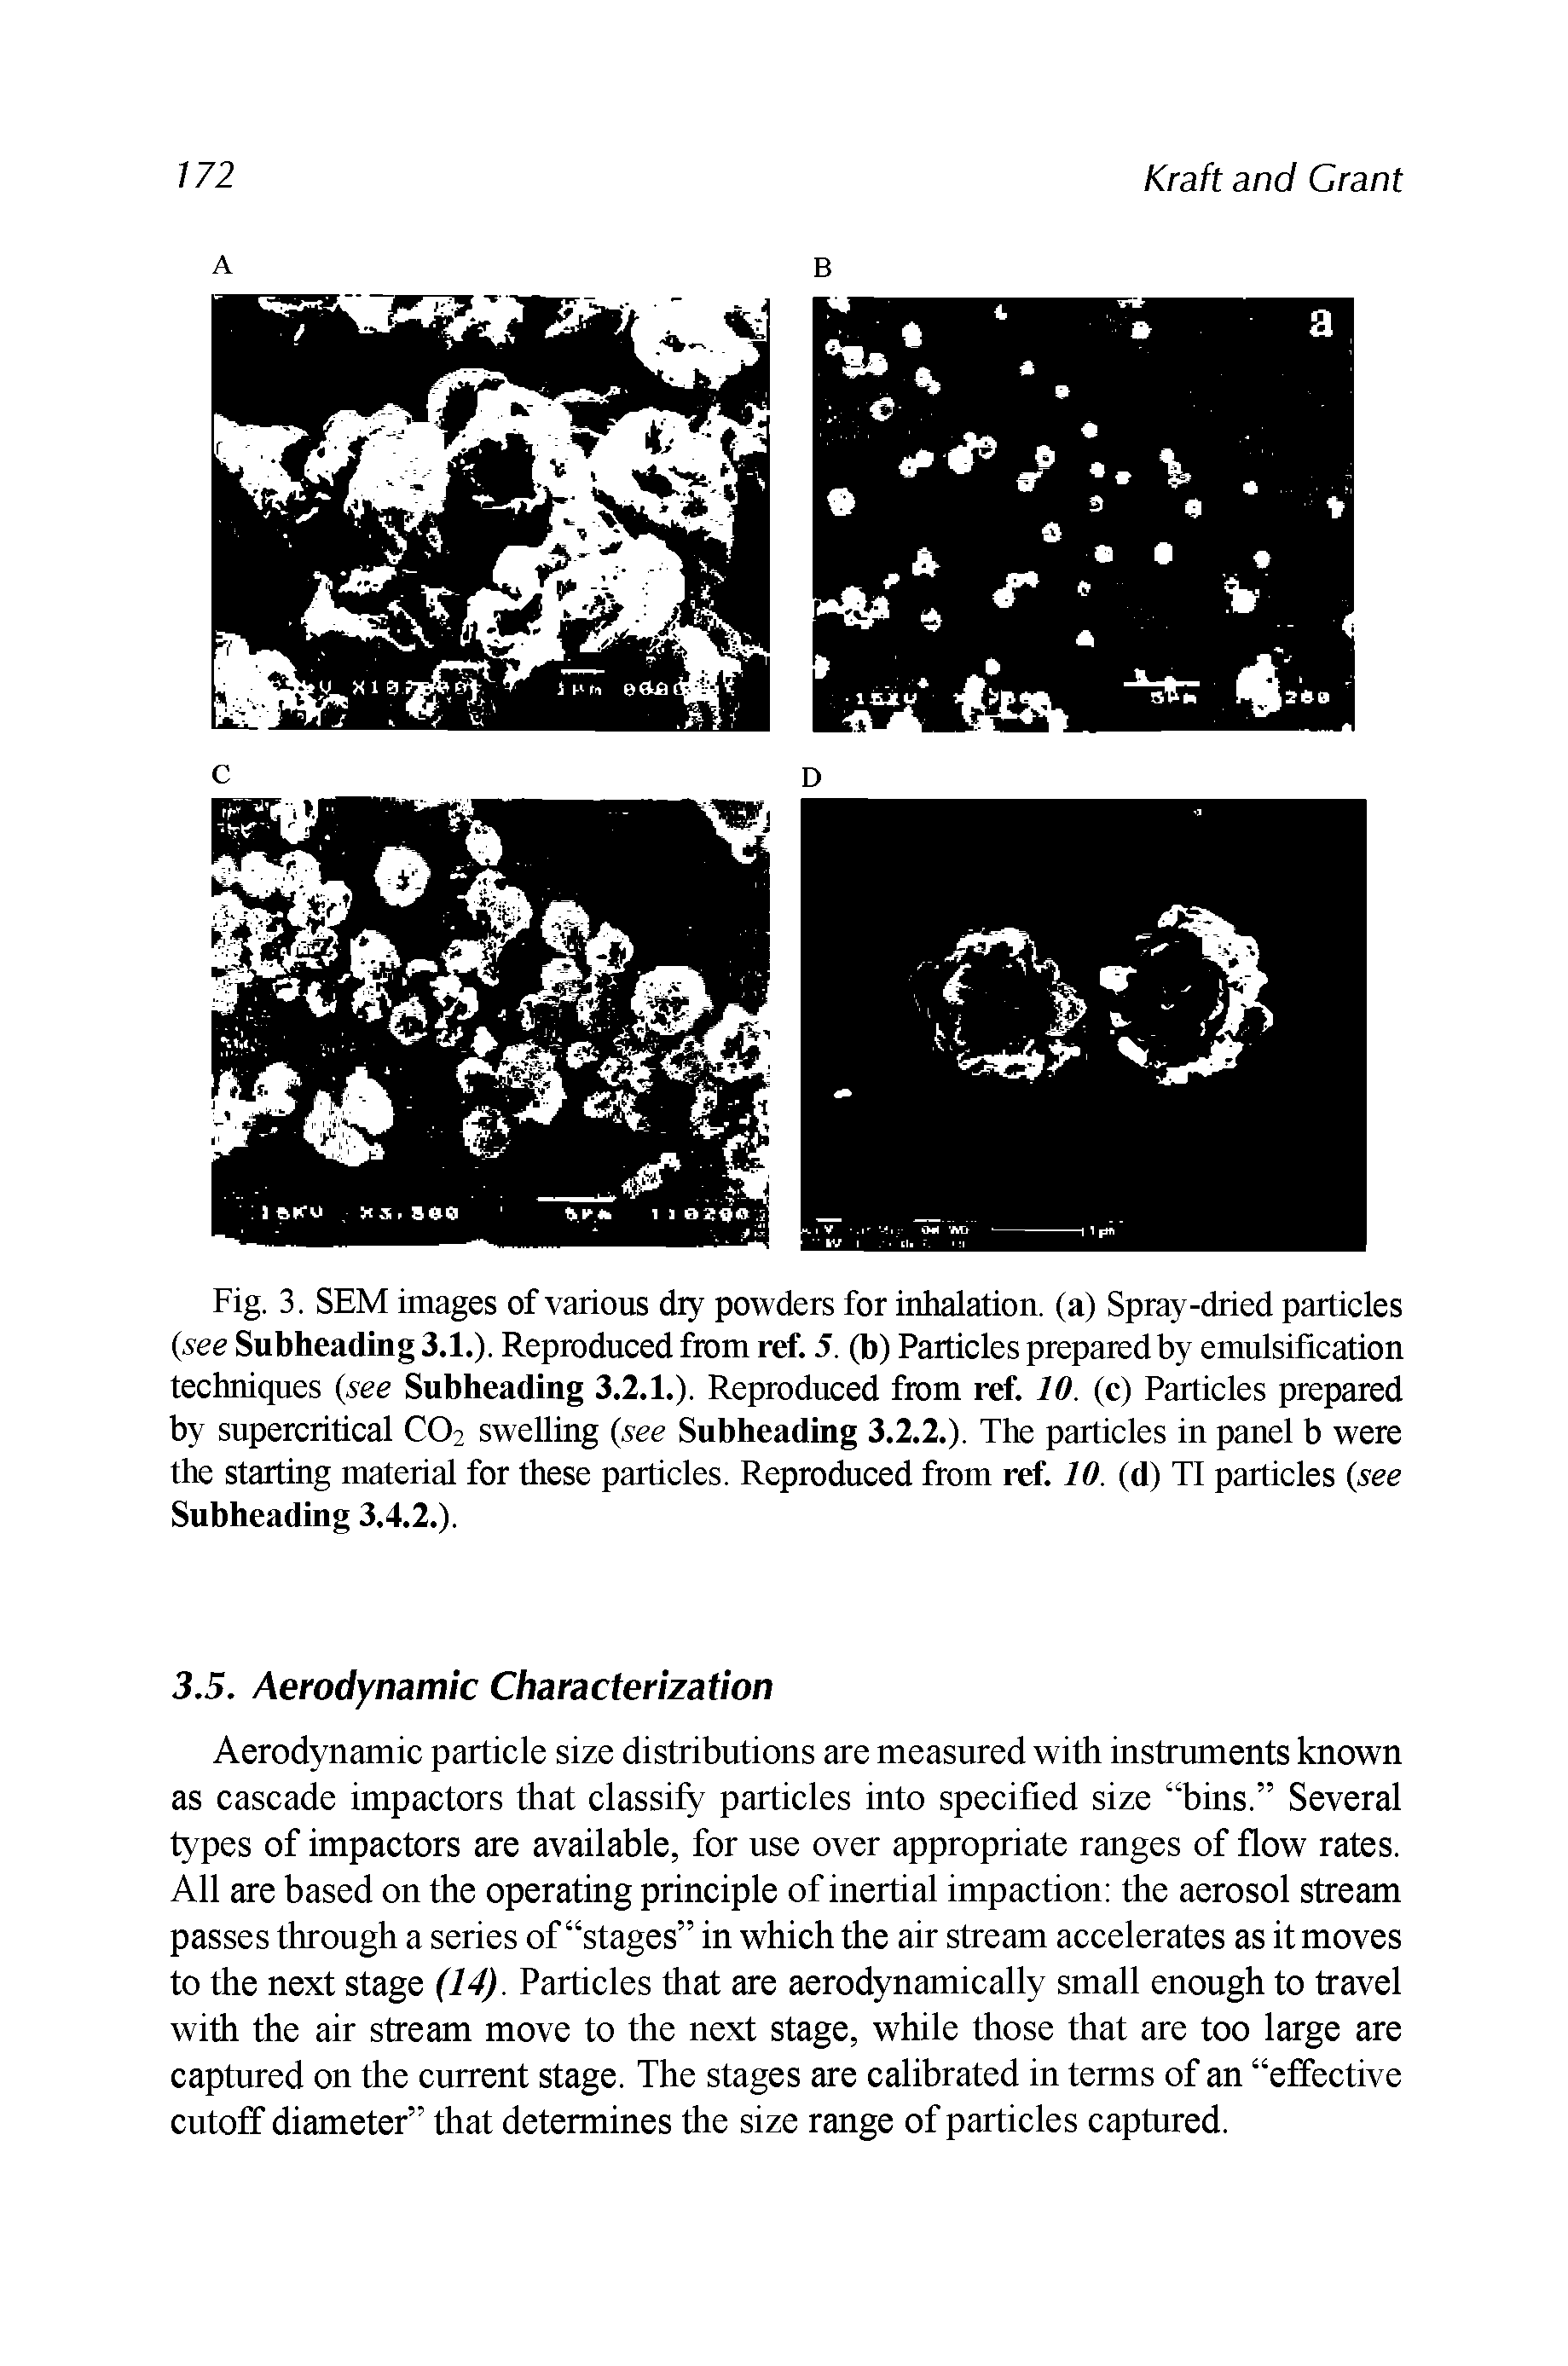 Fig. 3. SEM images of various dry powders for inhalation, (a) Spray-dried particles (see Subheading 3.1.)- Reproduced from ref. 5. (b) Particles prepared by emulsification techniques (see Subheading 3.2.1.), Reproduced from ref. 10. (c) Particles prepared by supercritical C02 swelling (see Subheading 3.2.2.), The particles in panel b were the starting material for these particles. Reproduced from ref. 10. (d) TI particles (see Subheading 3.4.2.),...